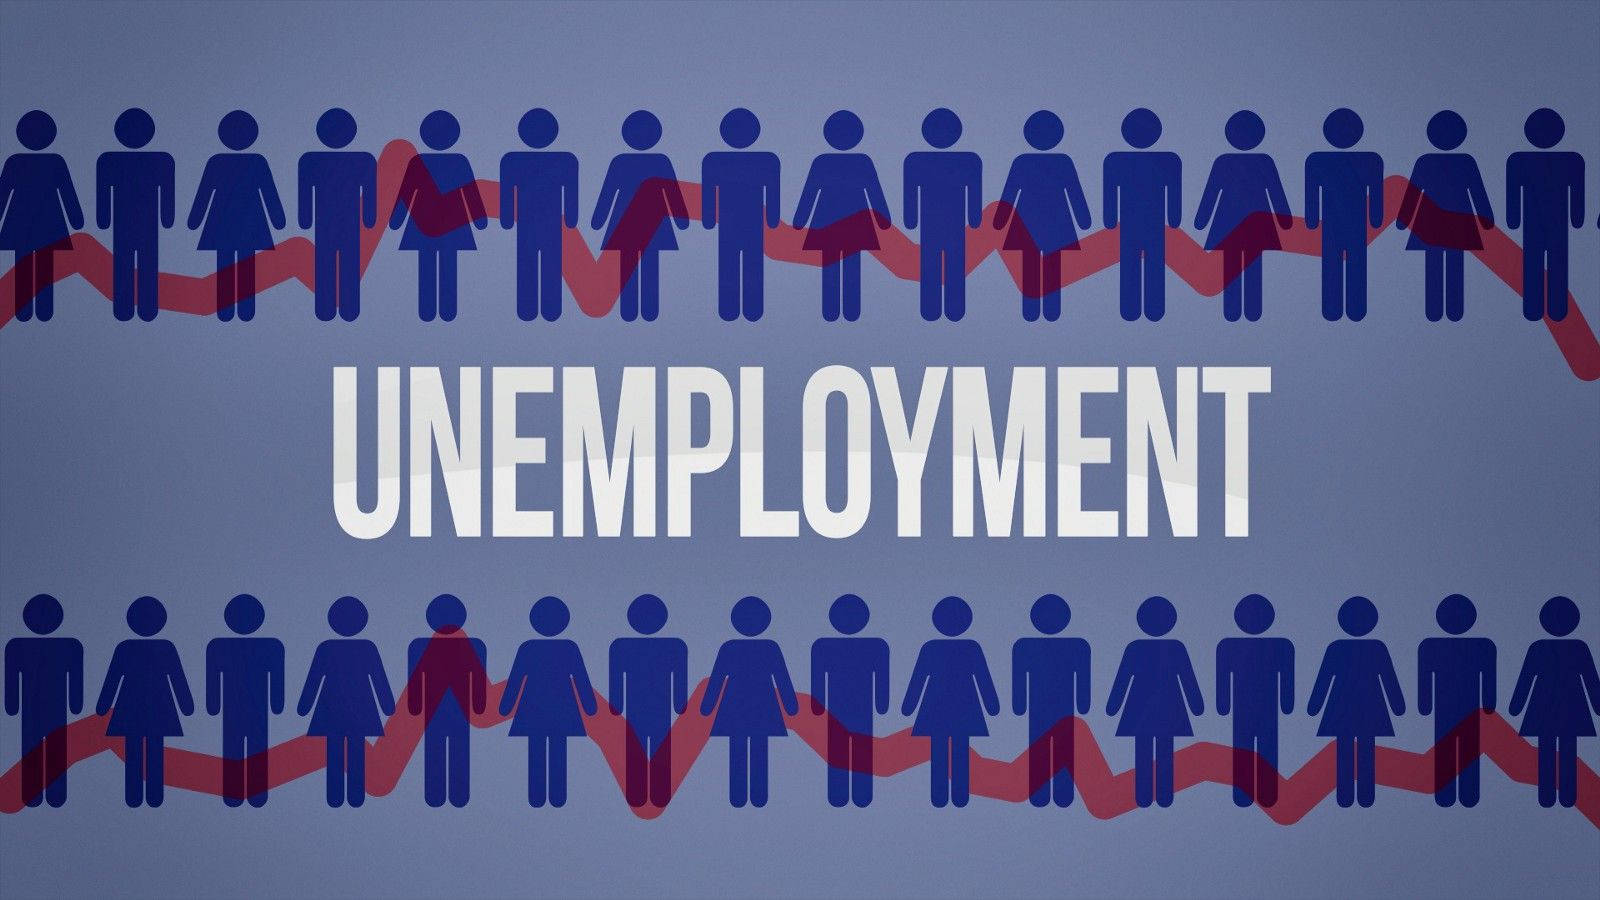 Unemployment Graphic Design With Blue Human Silhouettes Wallpaper